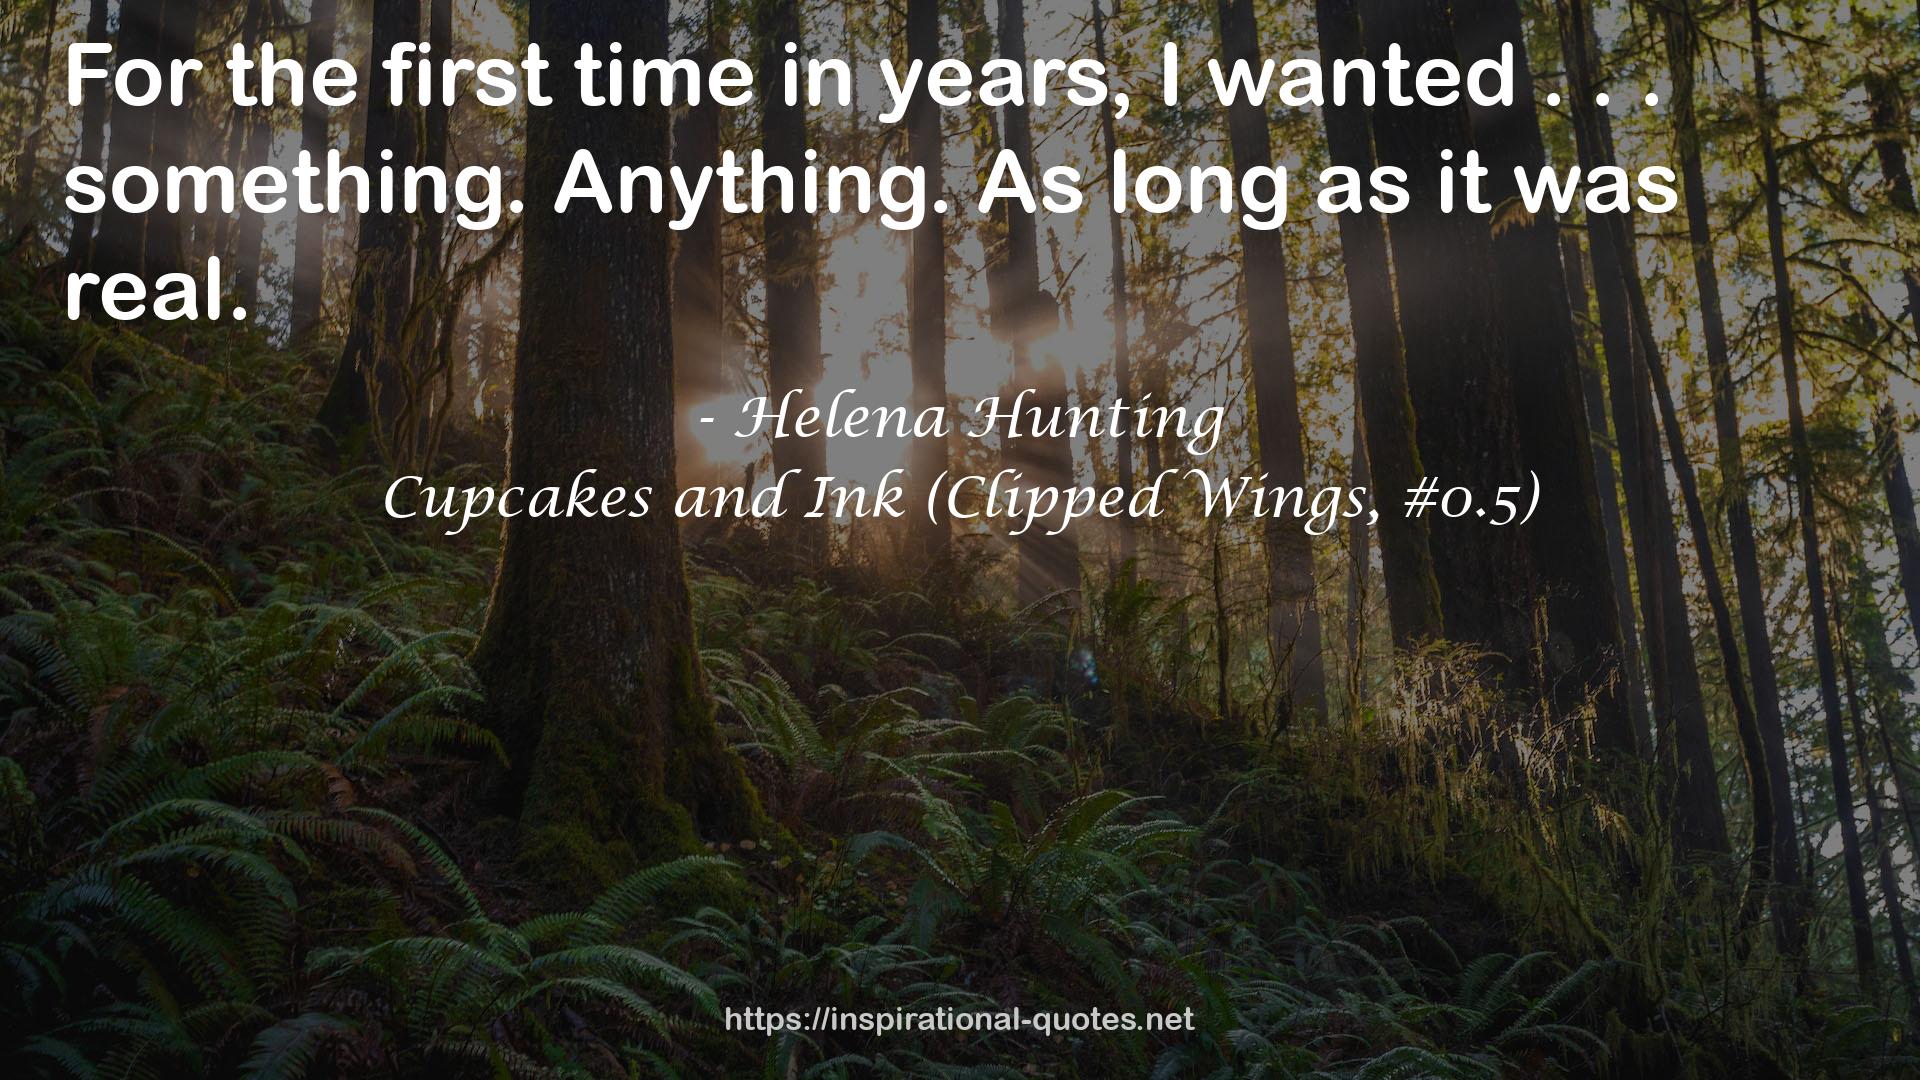 Cupcakes and Ink (Clipped Wings, #0.5) QUOTES